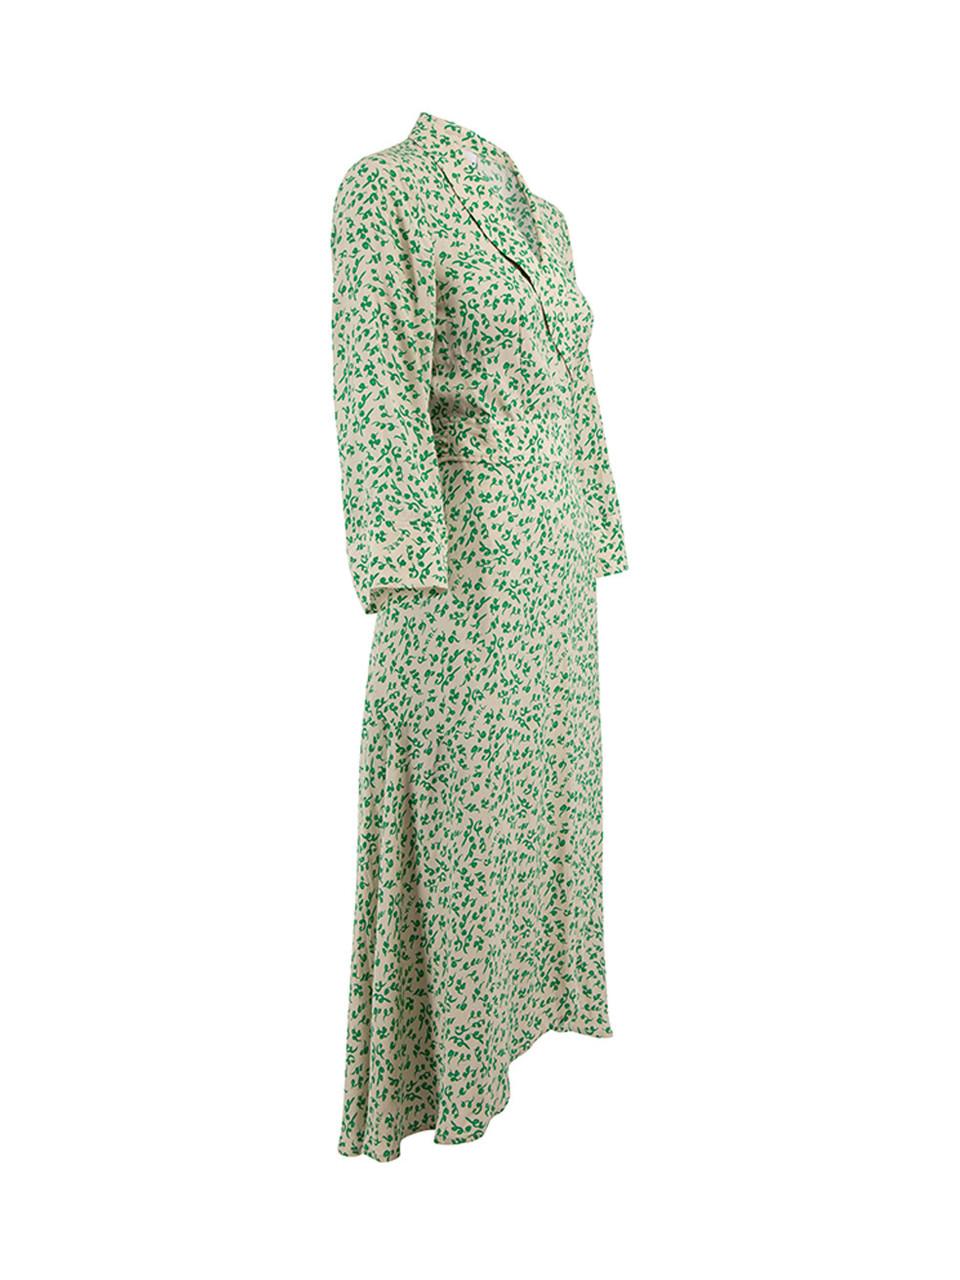 CONDITION is Very good. Hardly any visible wear to dress is evident on this used Ganni designer resale item.  Details  Cream and green Viscose Loose fit Wrap dress 3/4 Sleeves Waist tie Maxi dress   Made in China   Composition 53% Viscose, 47%